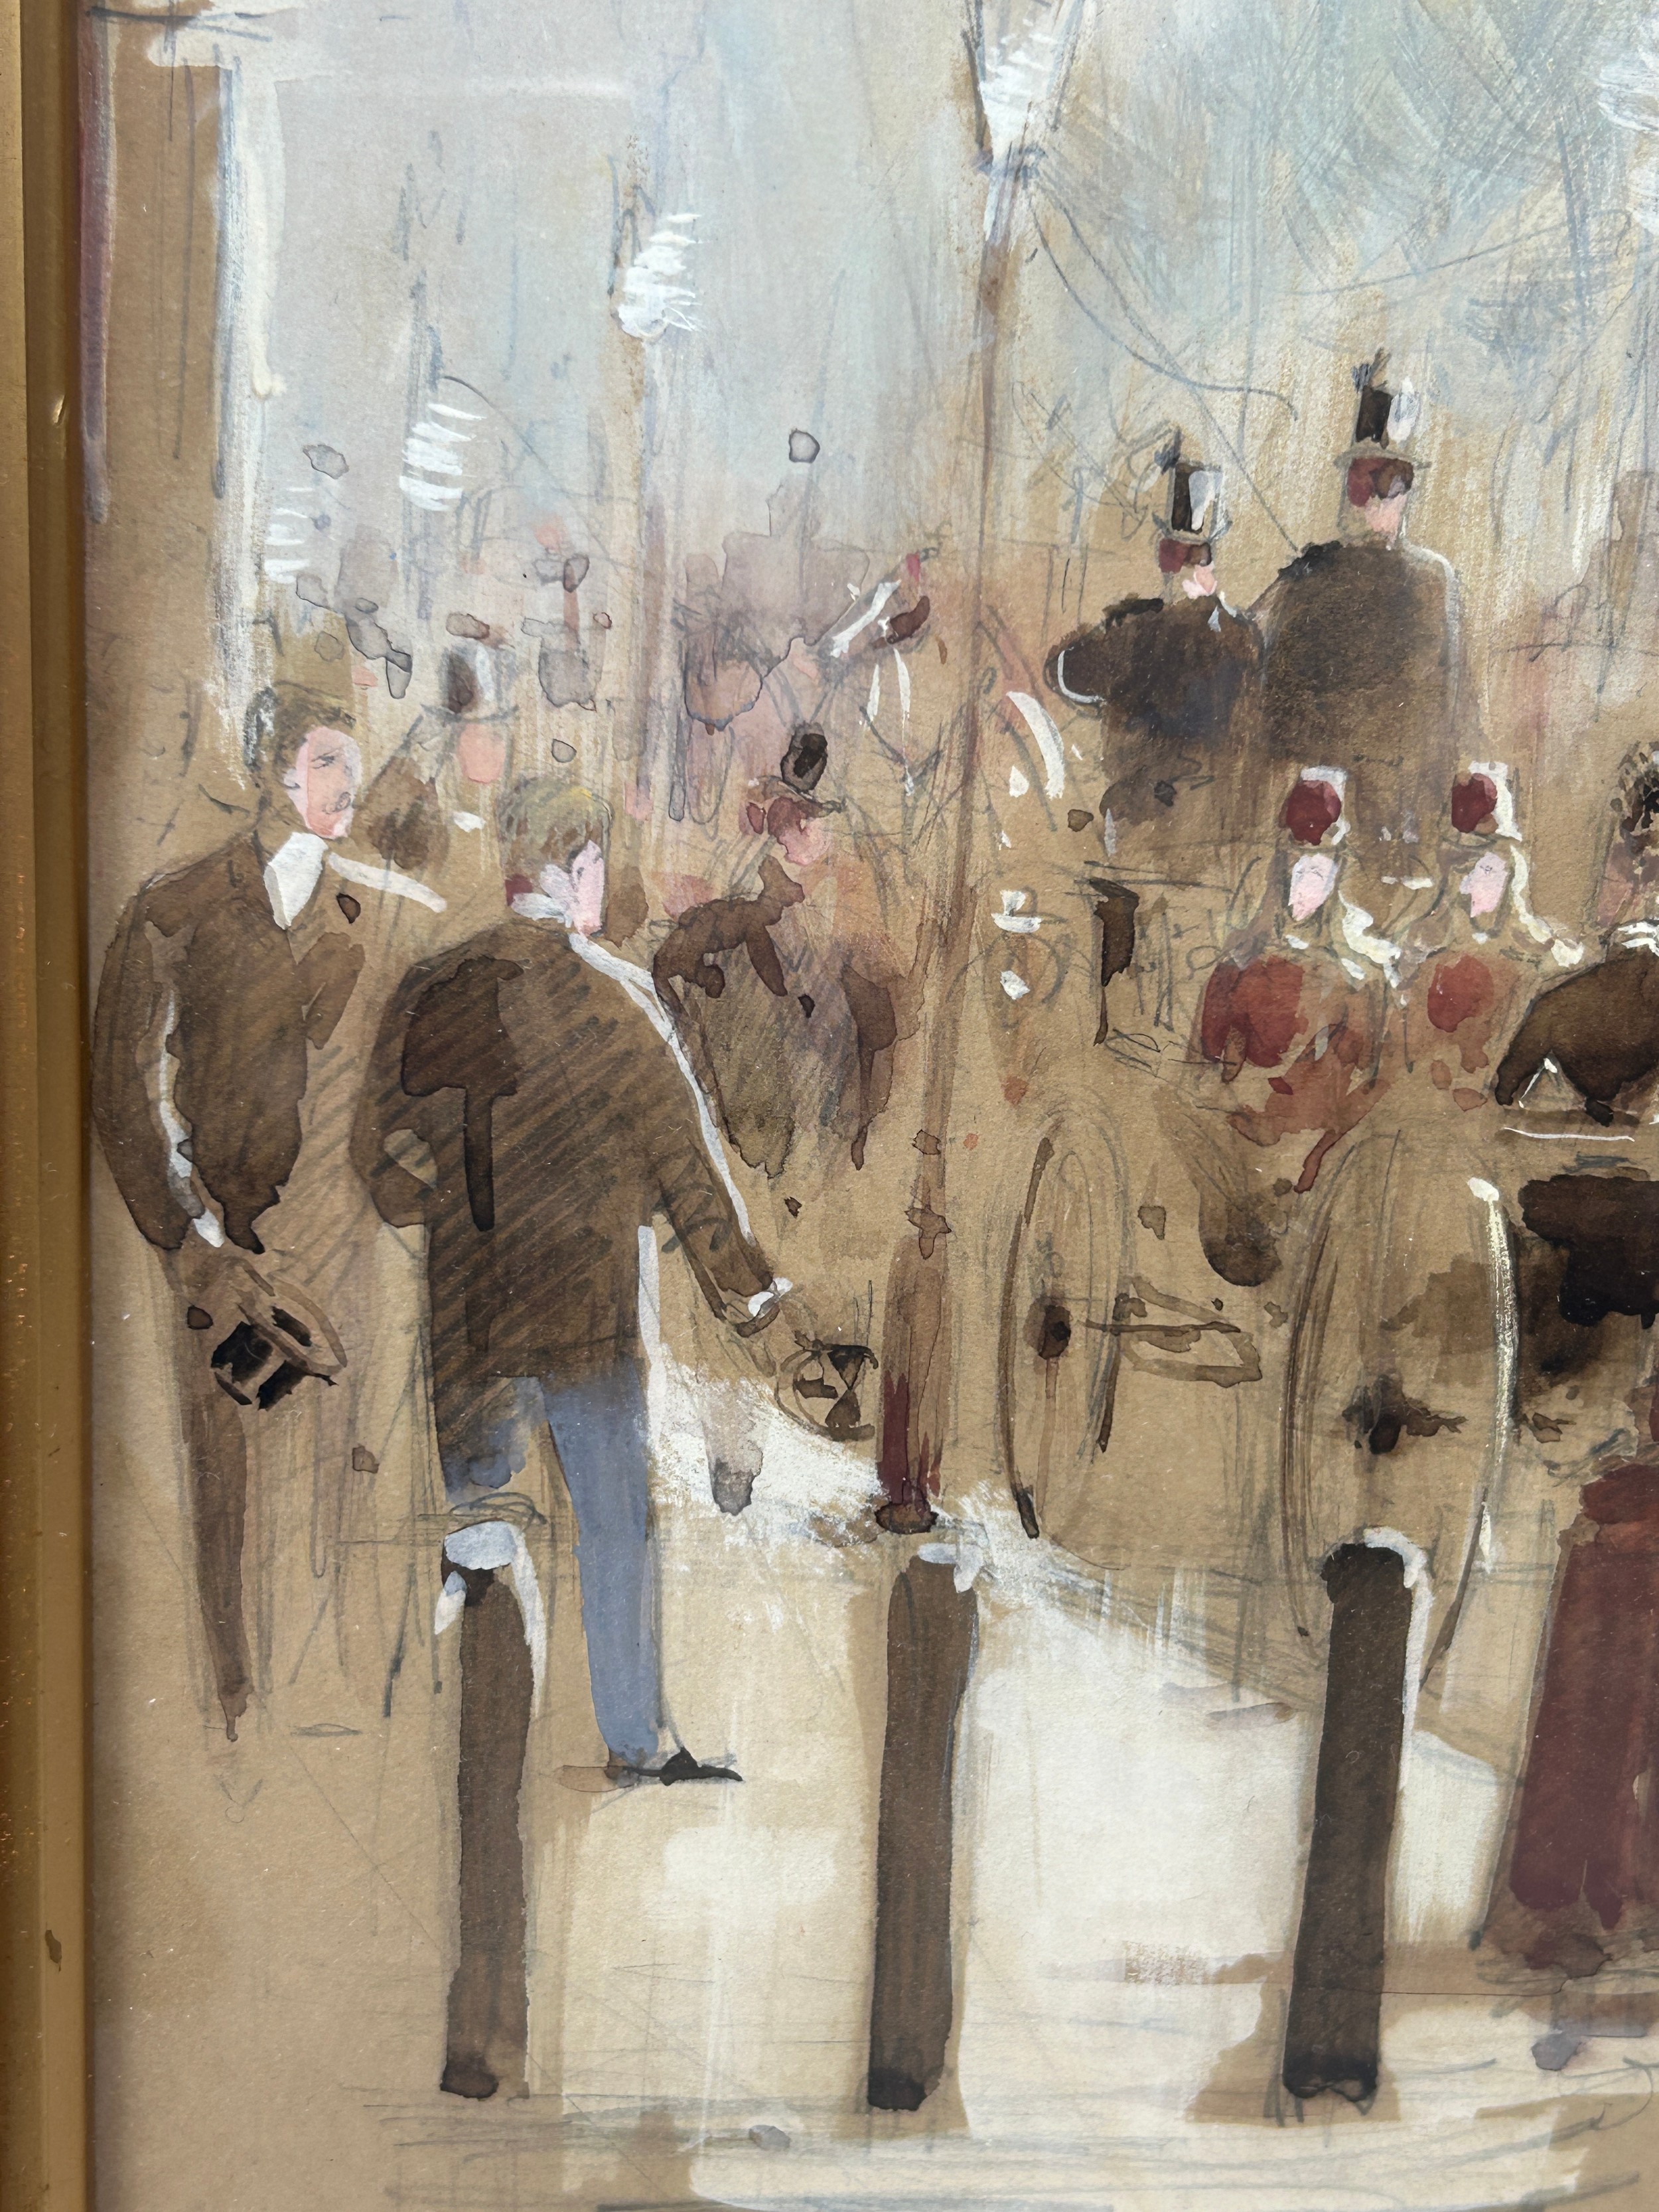 A 19TH OR 20TH CENTURY FRENCH OR CONTINENTAL WATERCOLOUR PAINTING ON PAPER DEPICTING FIGURES BY A - Image 3 of 4